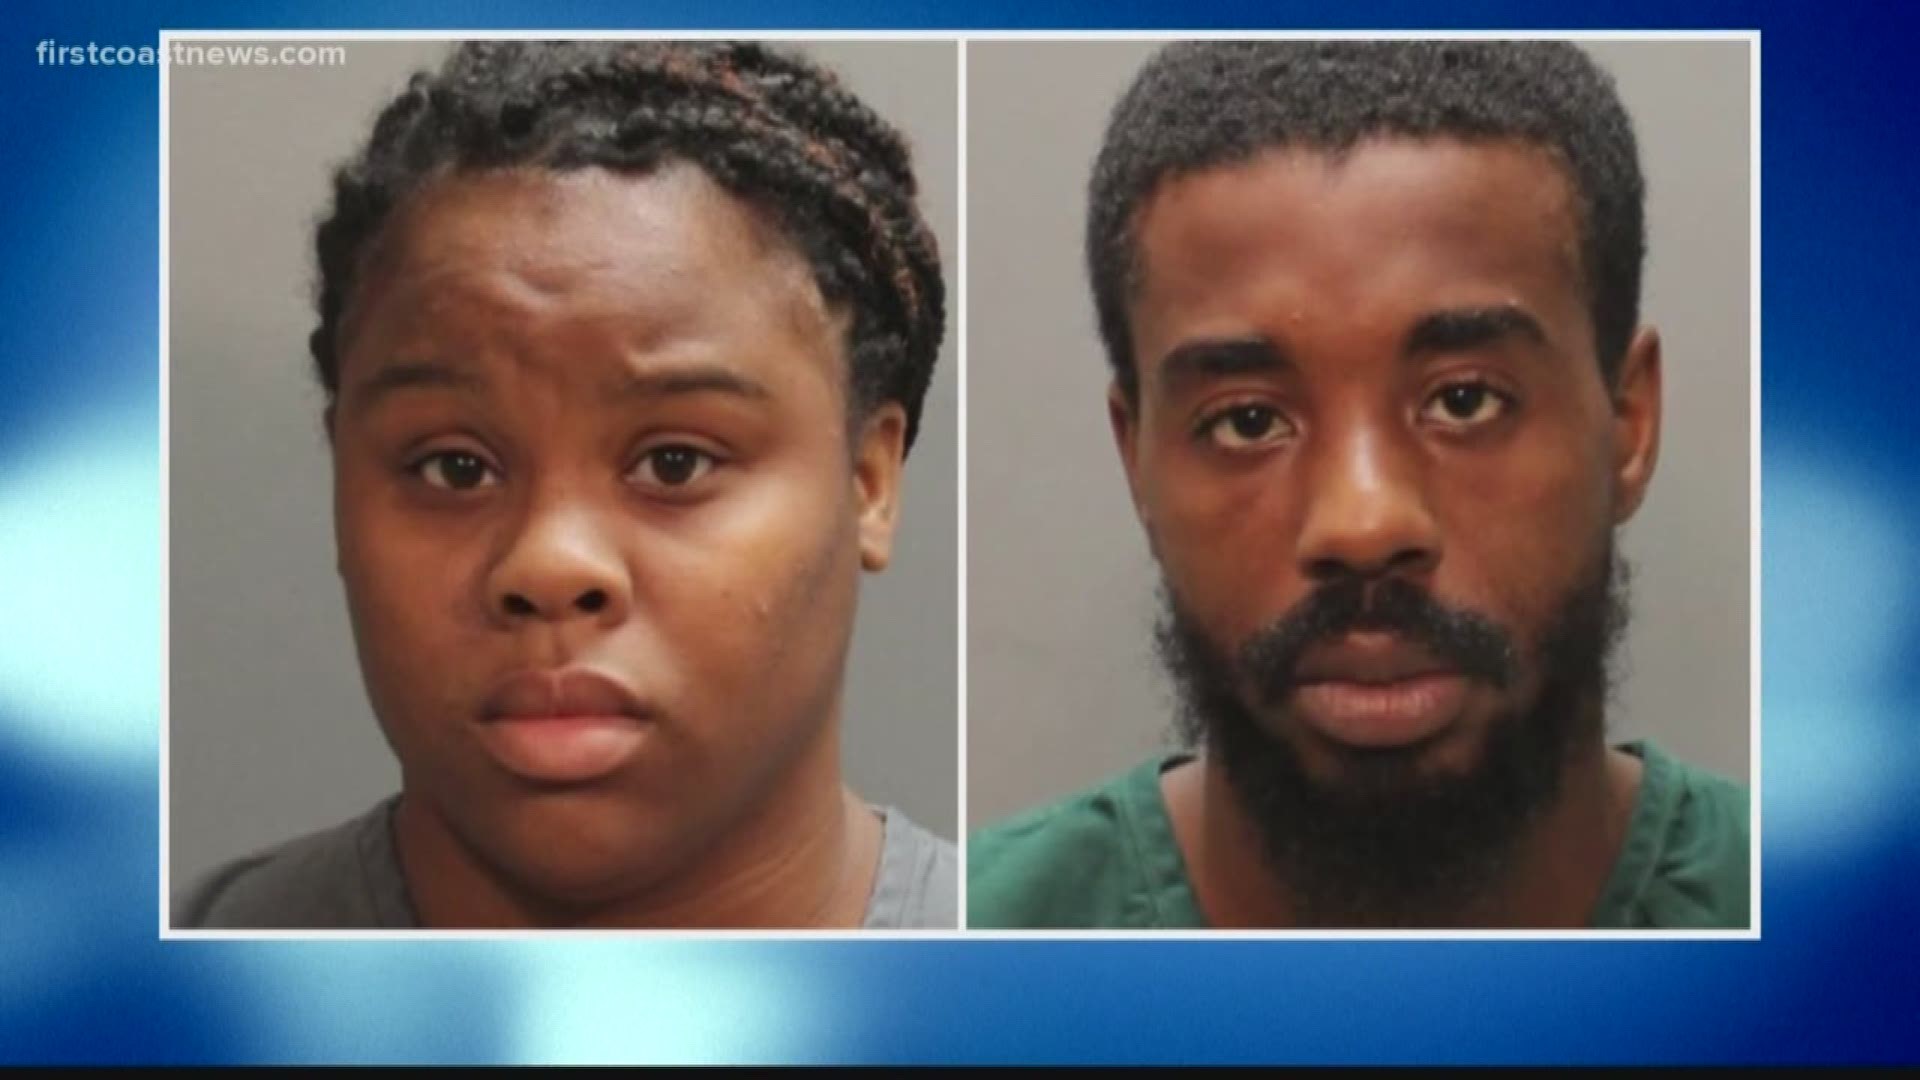 A mother and her boyfriend have been charged with murder after police say they abused a 5-year-old girl to death.